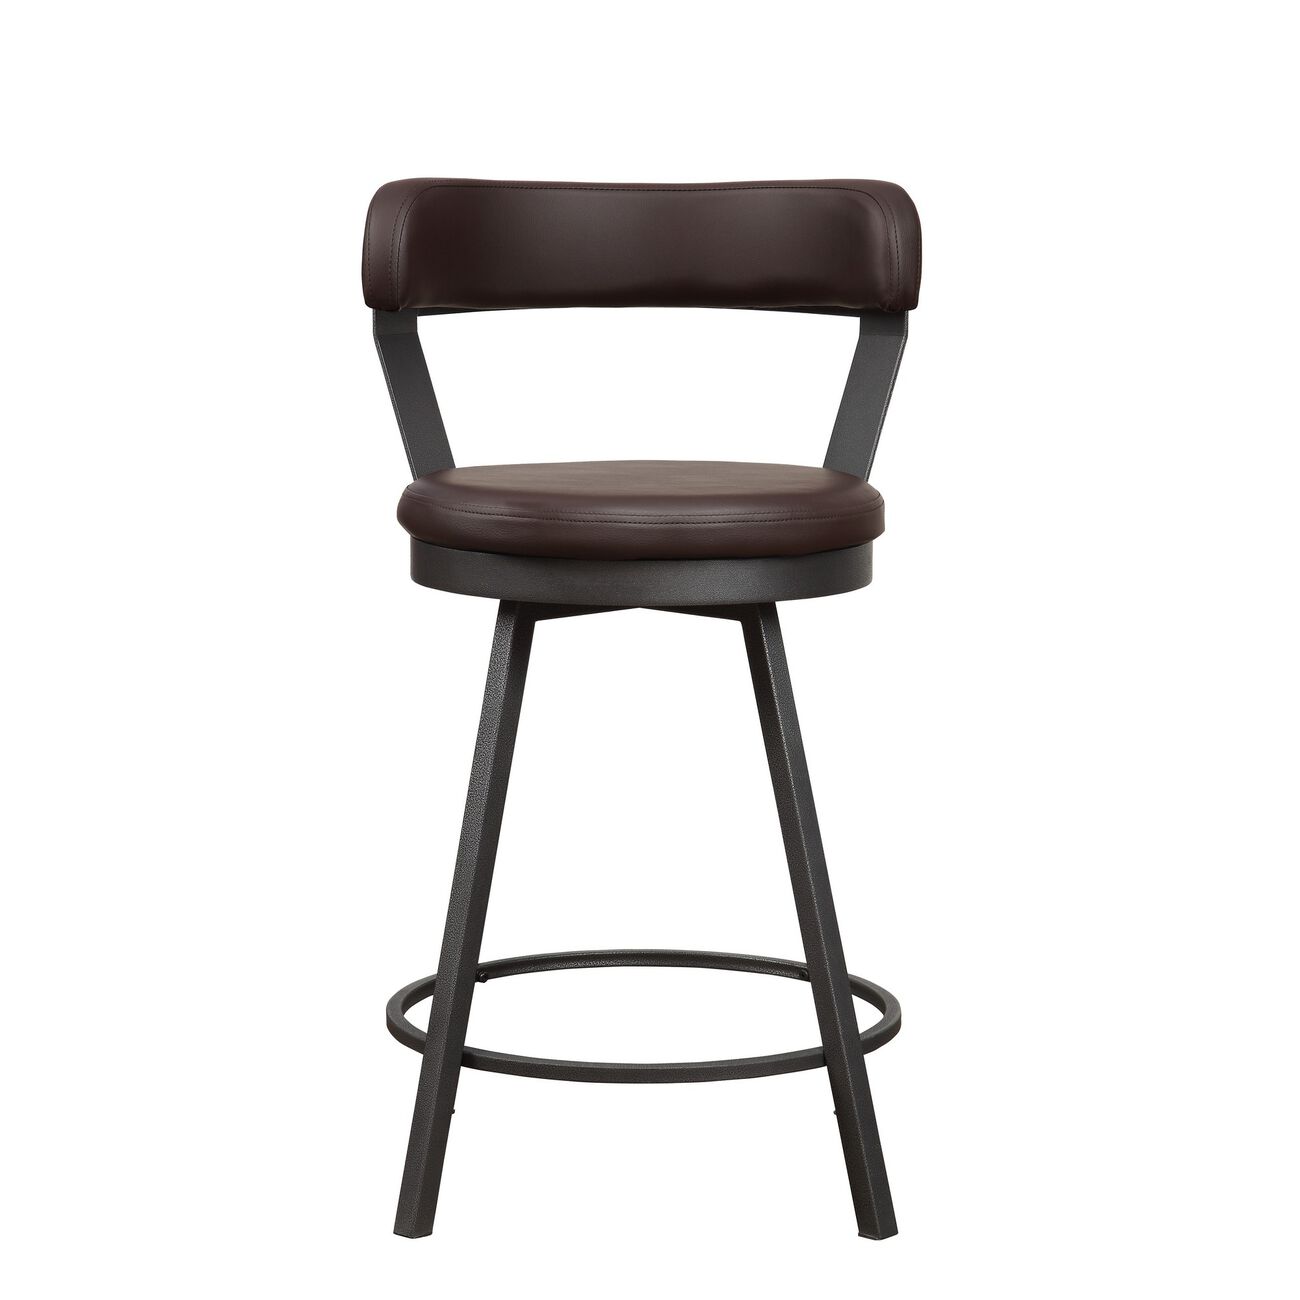 Leatherette Counter Height Chair with Metal Slanted Legs, Set of 2, Brown